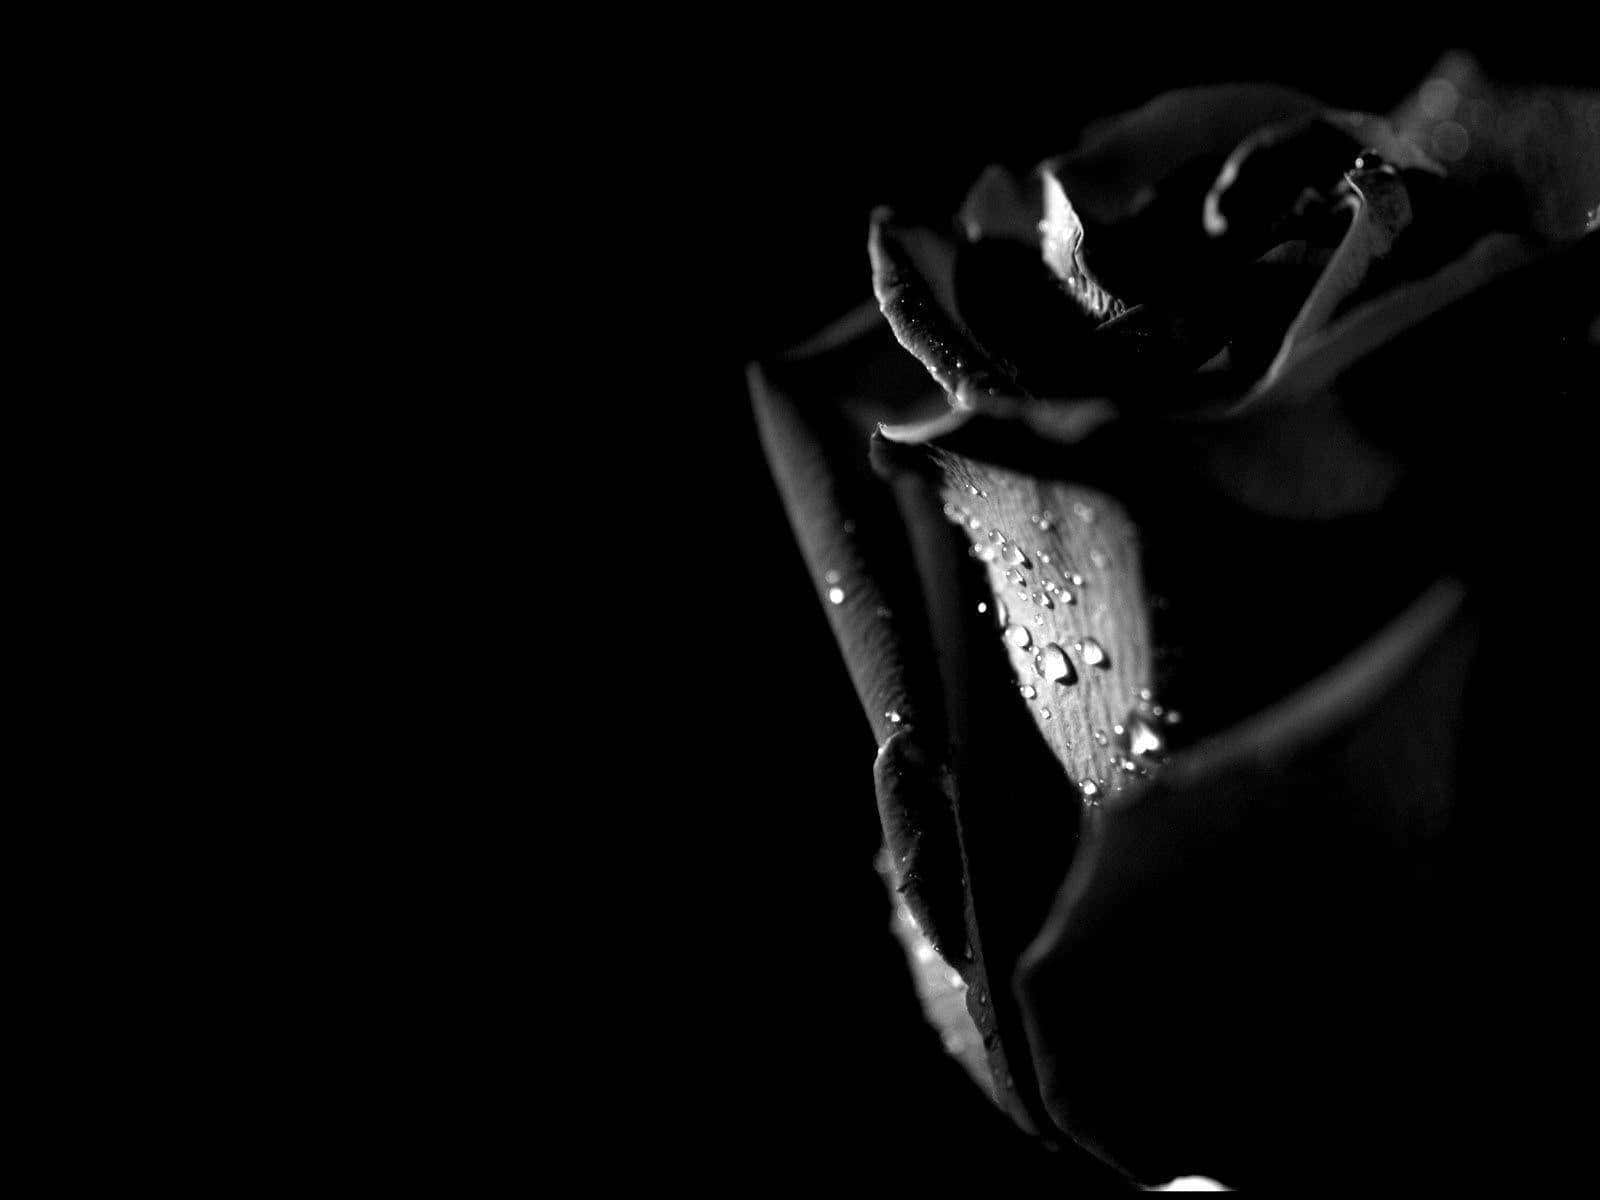 Black Rose Illustration Stock Photos and Images  123RF